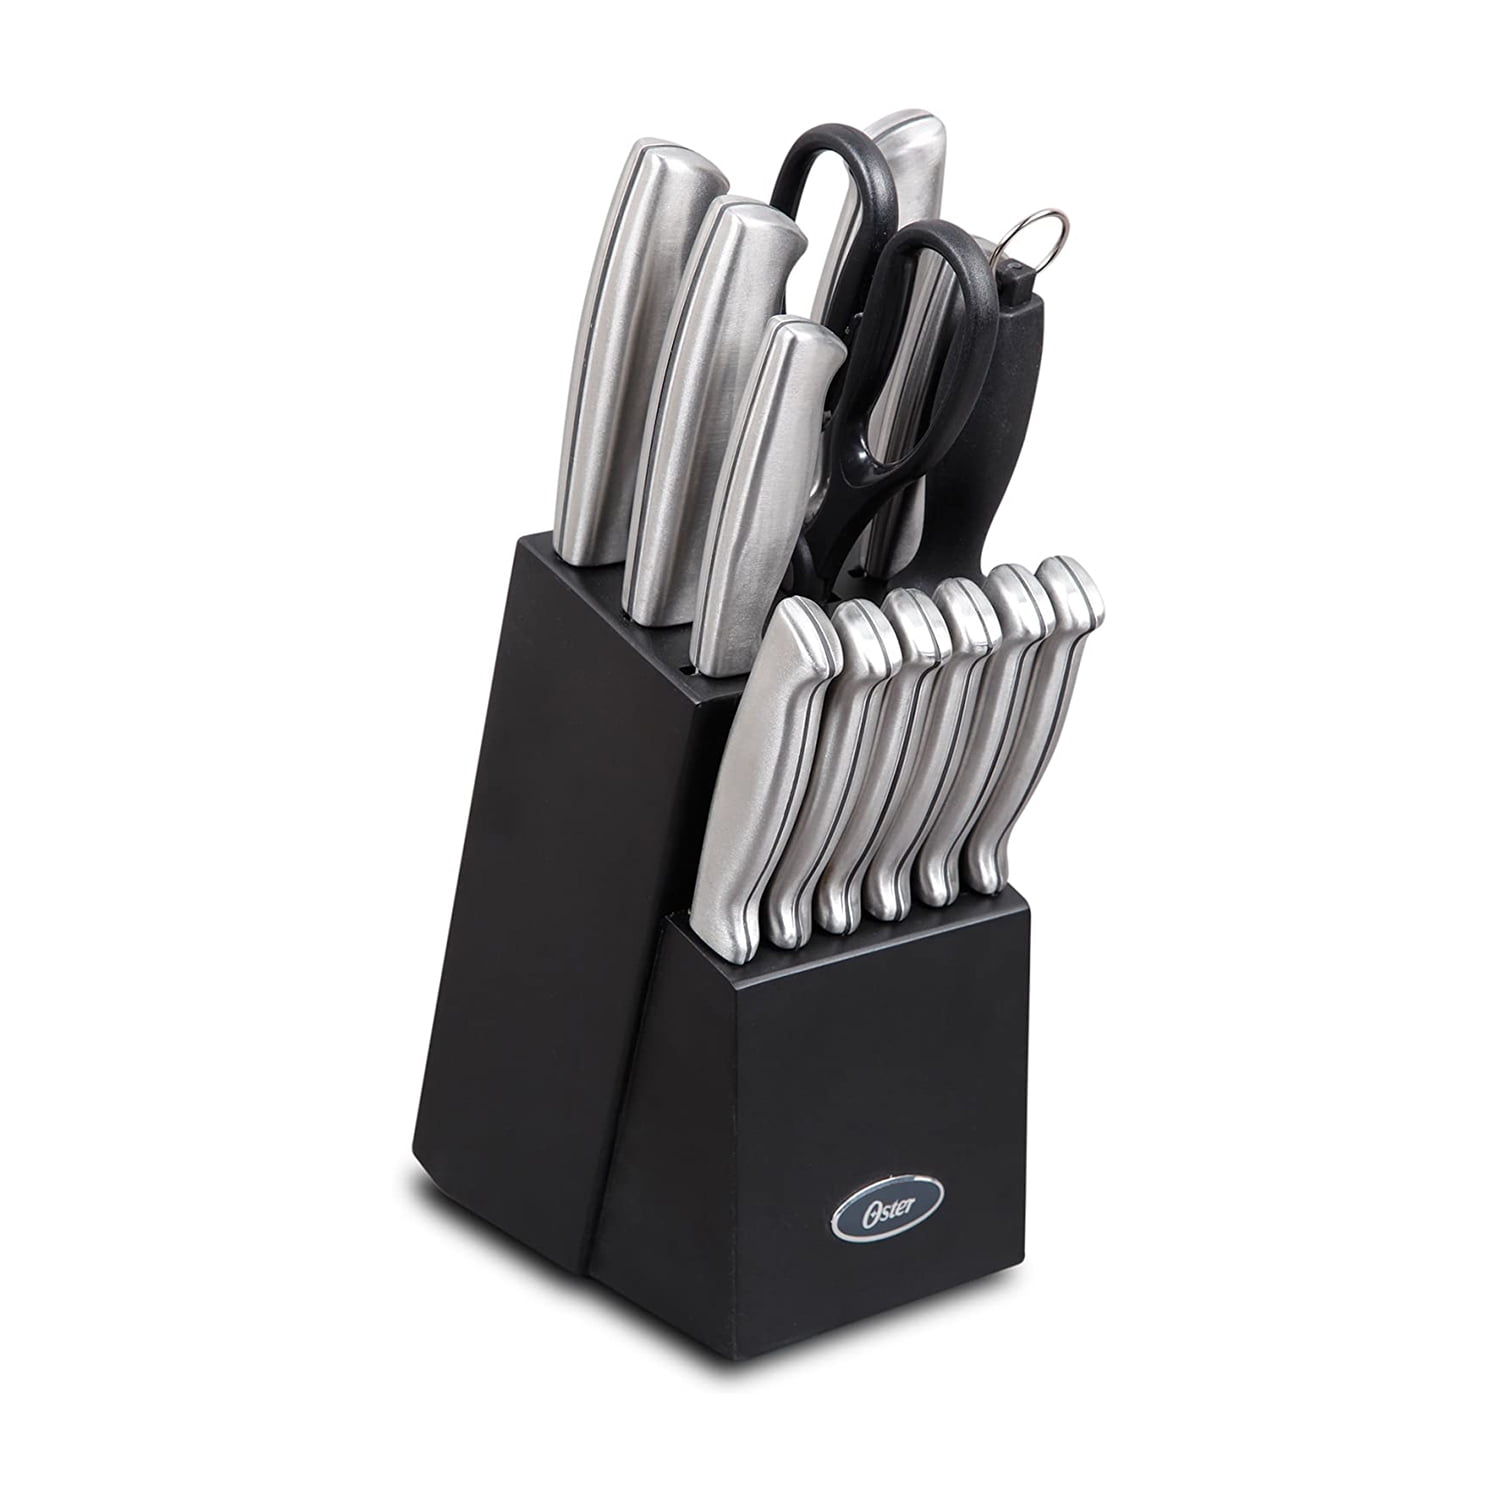 Knife Sets for sale in Gaylord, Michigan